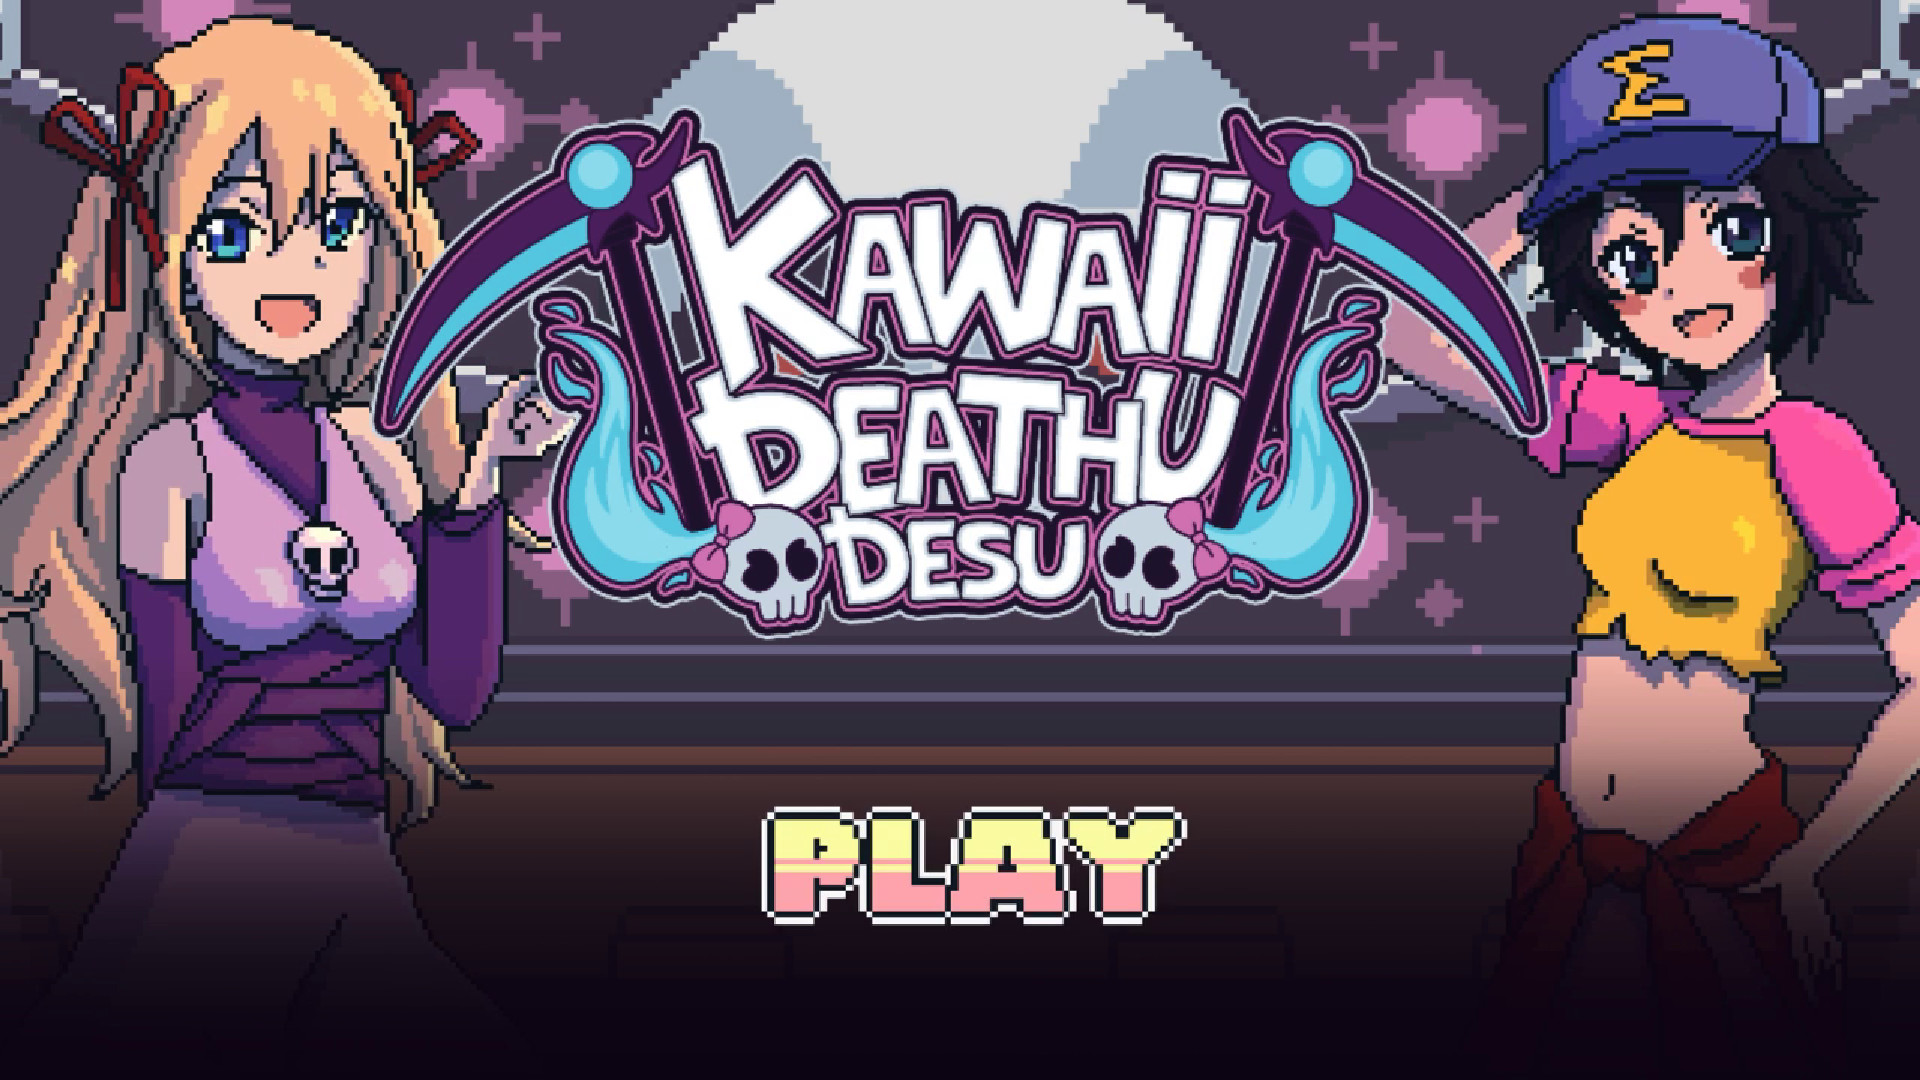 Find the best computers for Kawaii Deathu Desu